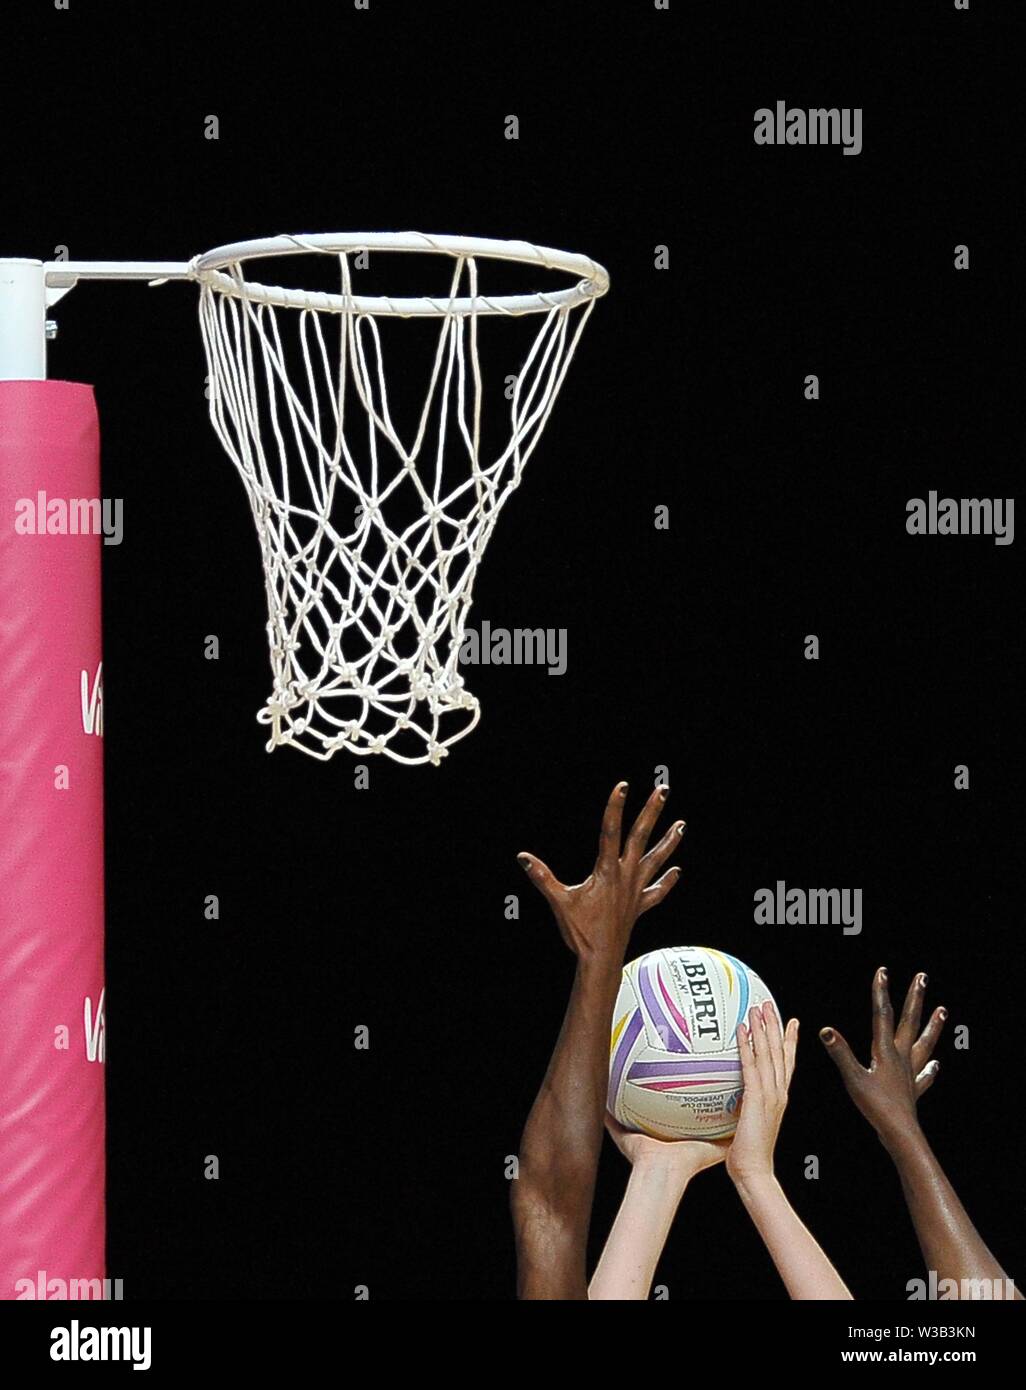 Liverpool, UK. 14 July 2019. Hands try to block a shot during the Preliminary game between Uganda and Scotland at the Netball World Cup. M and S arena, Liverpool. Merseyside. UK. Credit Garry Bowdenh/SIP photo agency/Alamy live news. Stock Photo